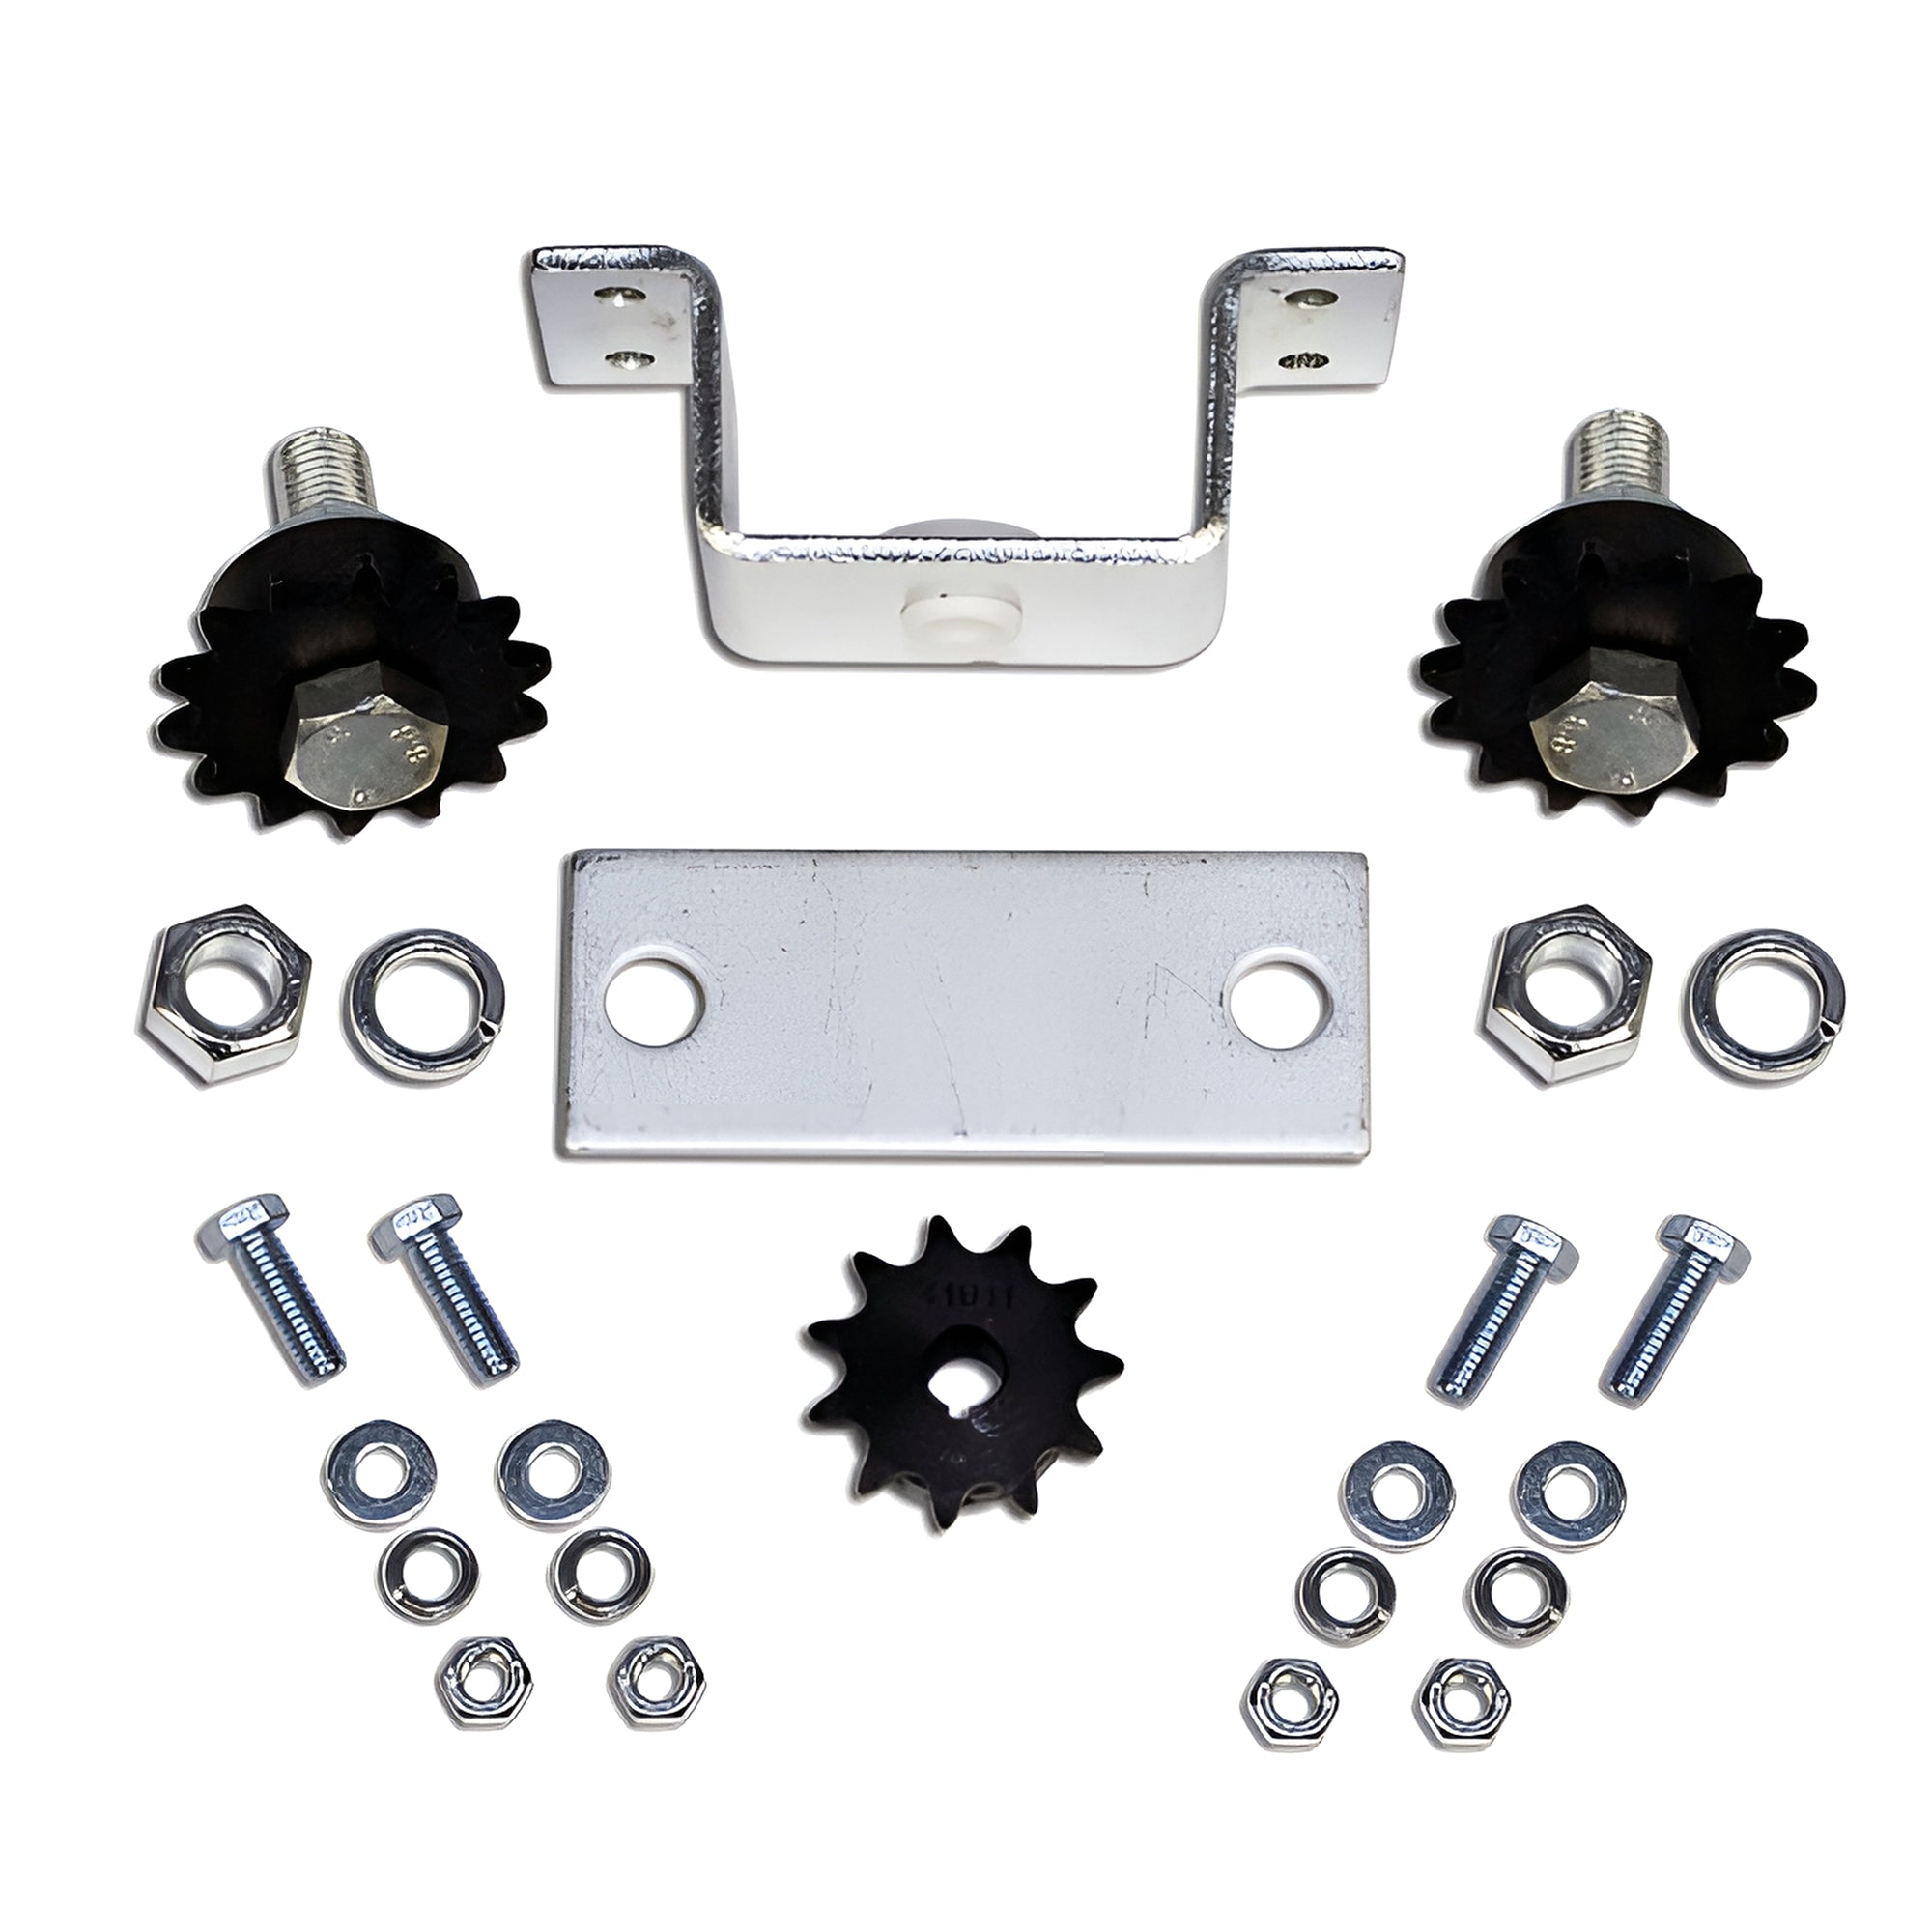 Sprocket Assembly Kit for DC Slider (R4423) | Mighty Mule Automatic Gate Openers